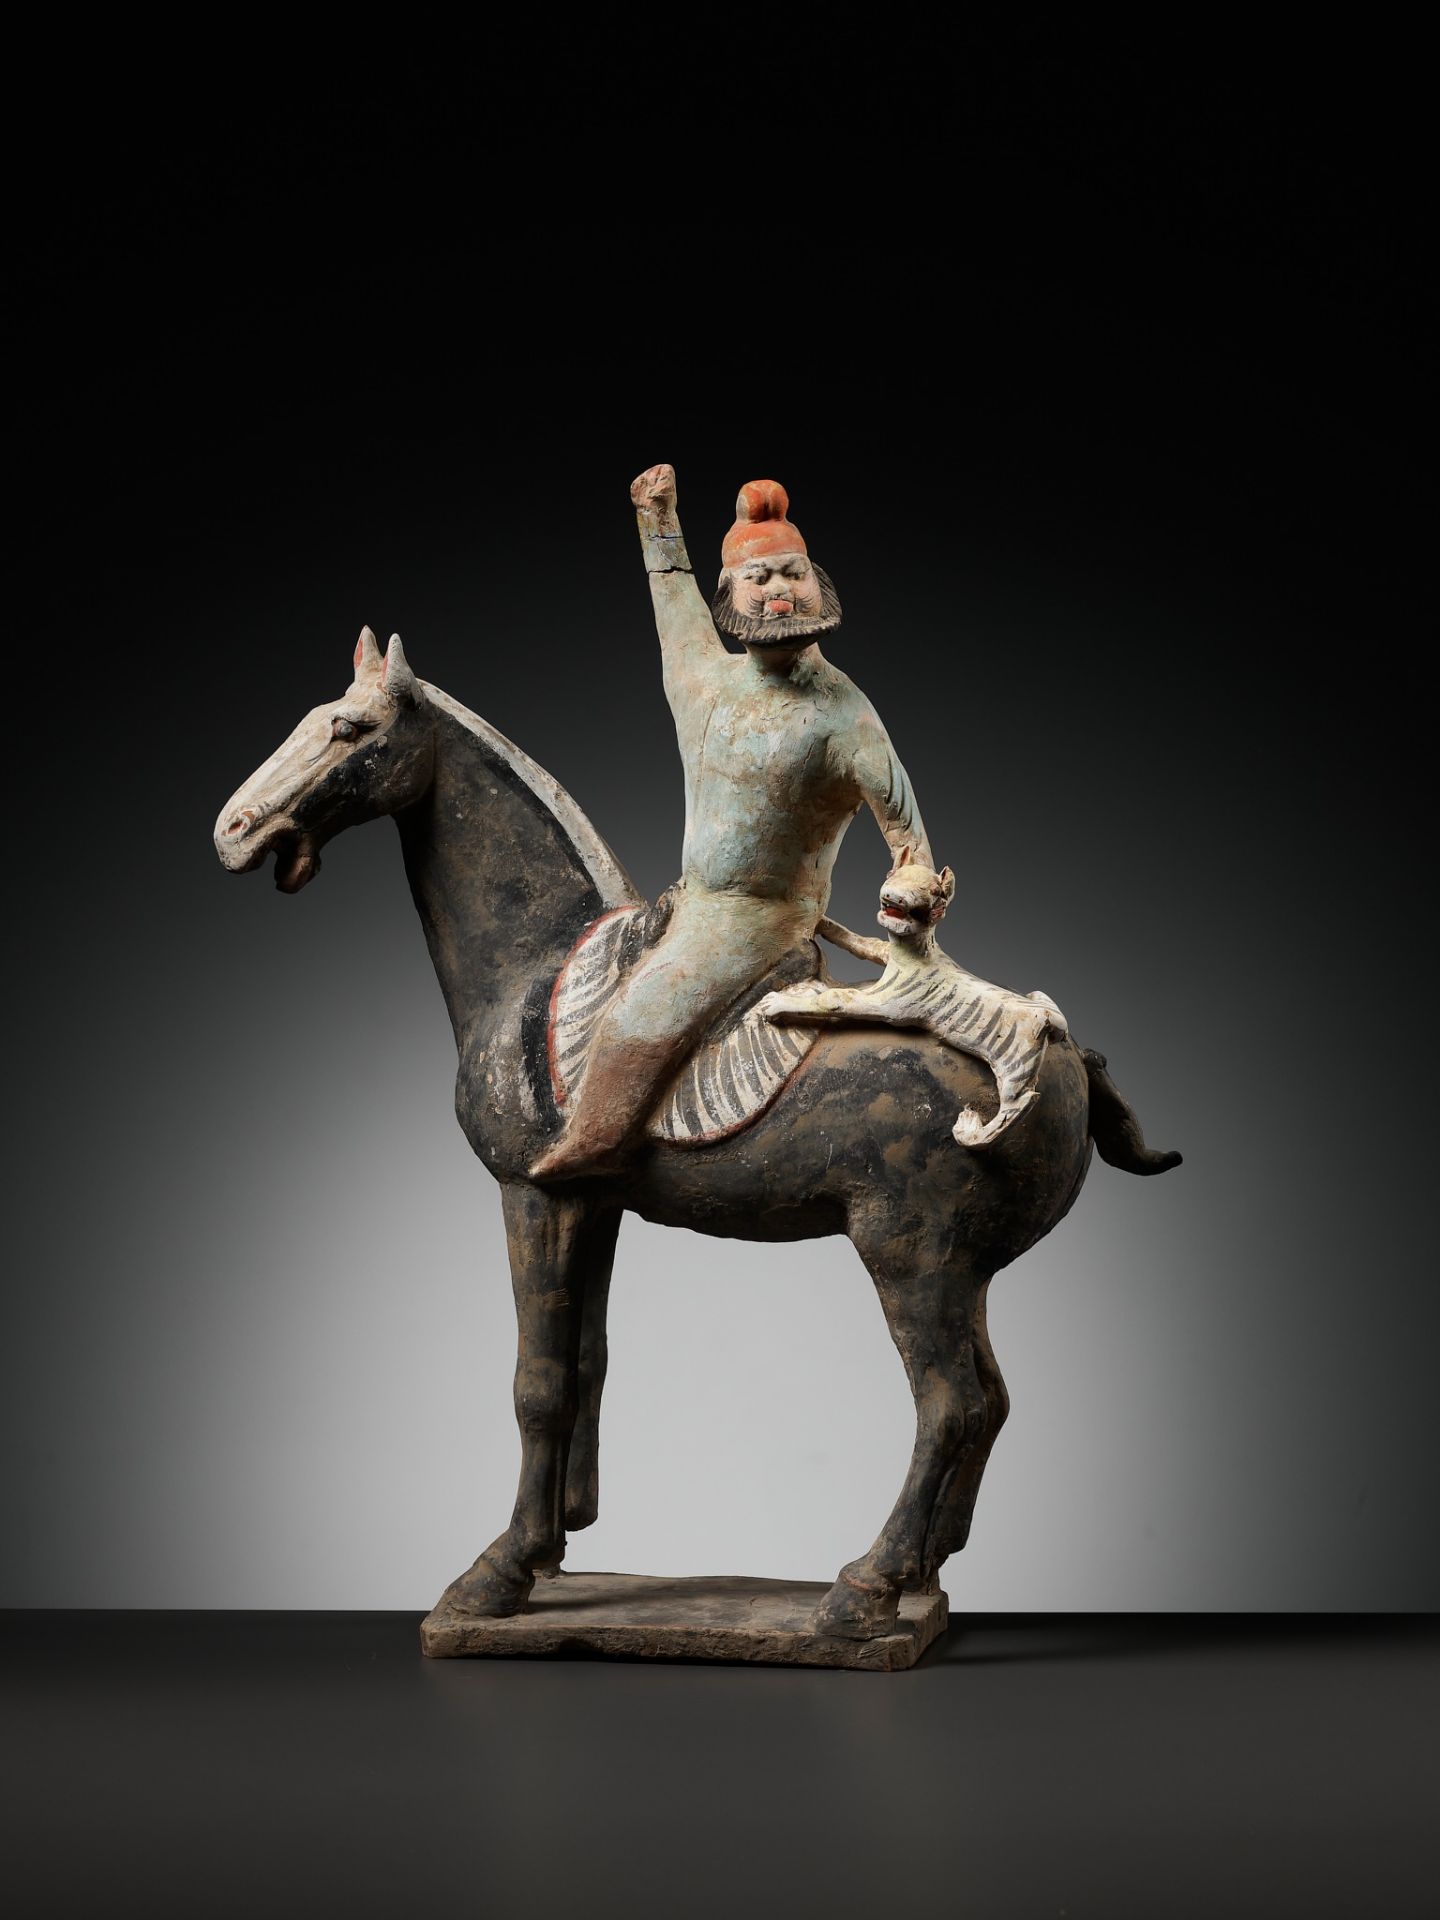 A RARE PAINTED POTTERY HORSE WITH A 'PHRYGIAN' RIDER AND TIGER CUB, TANG DYNASTY - Image 12 of 14